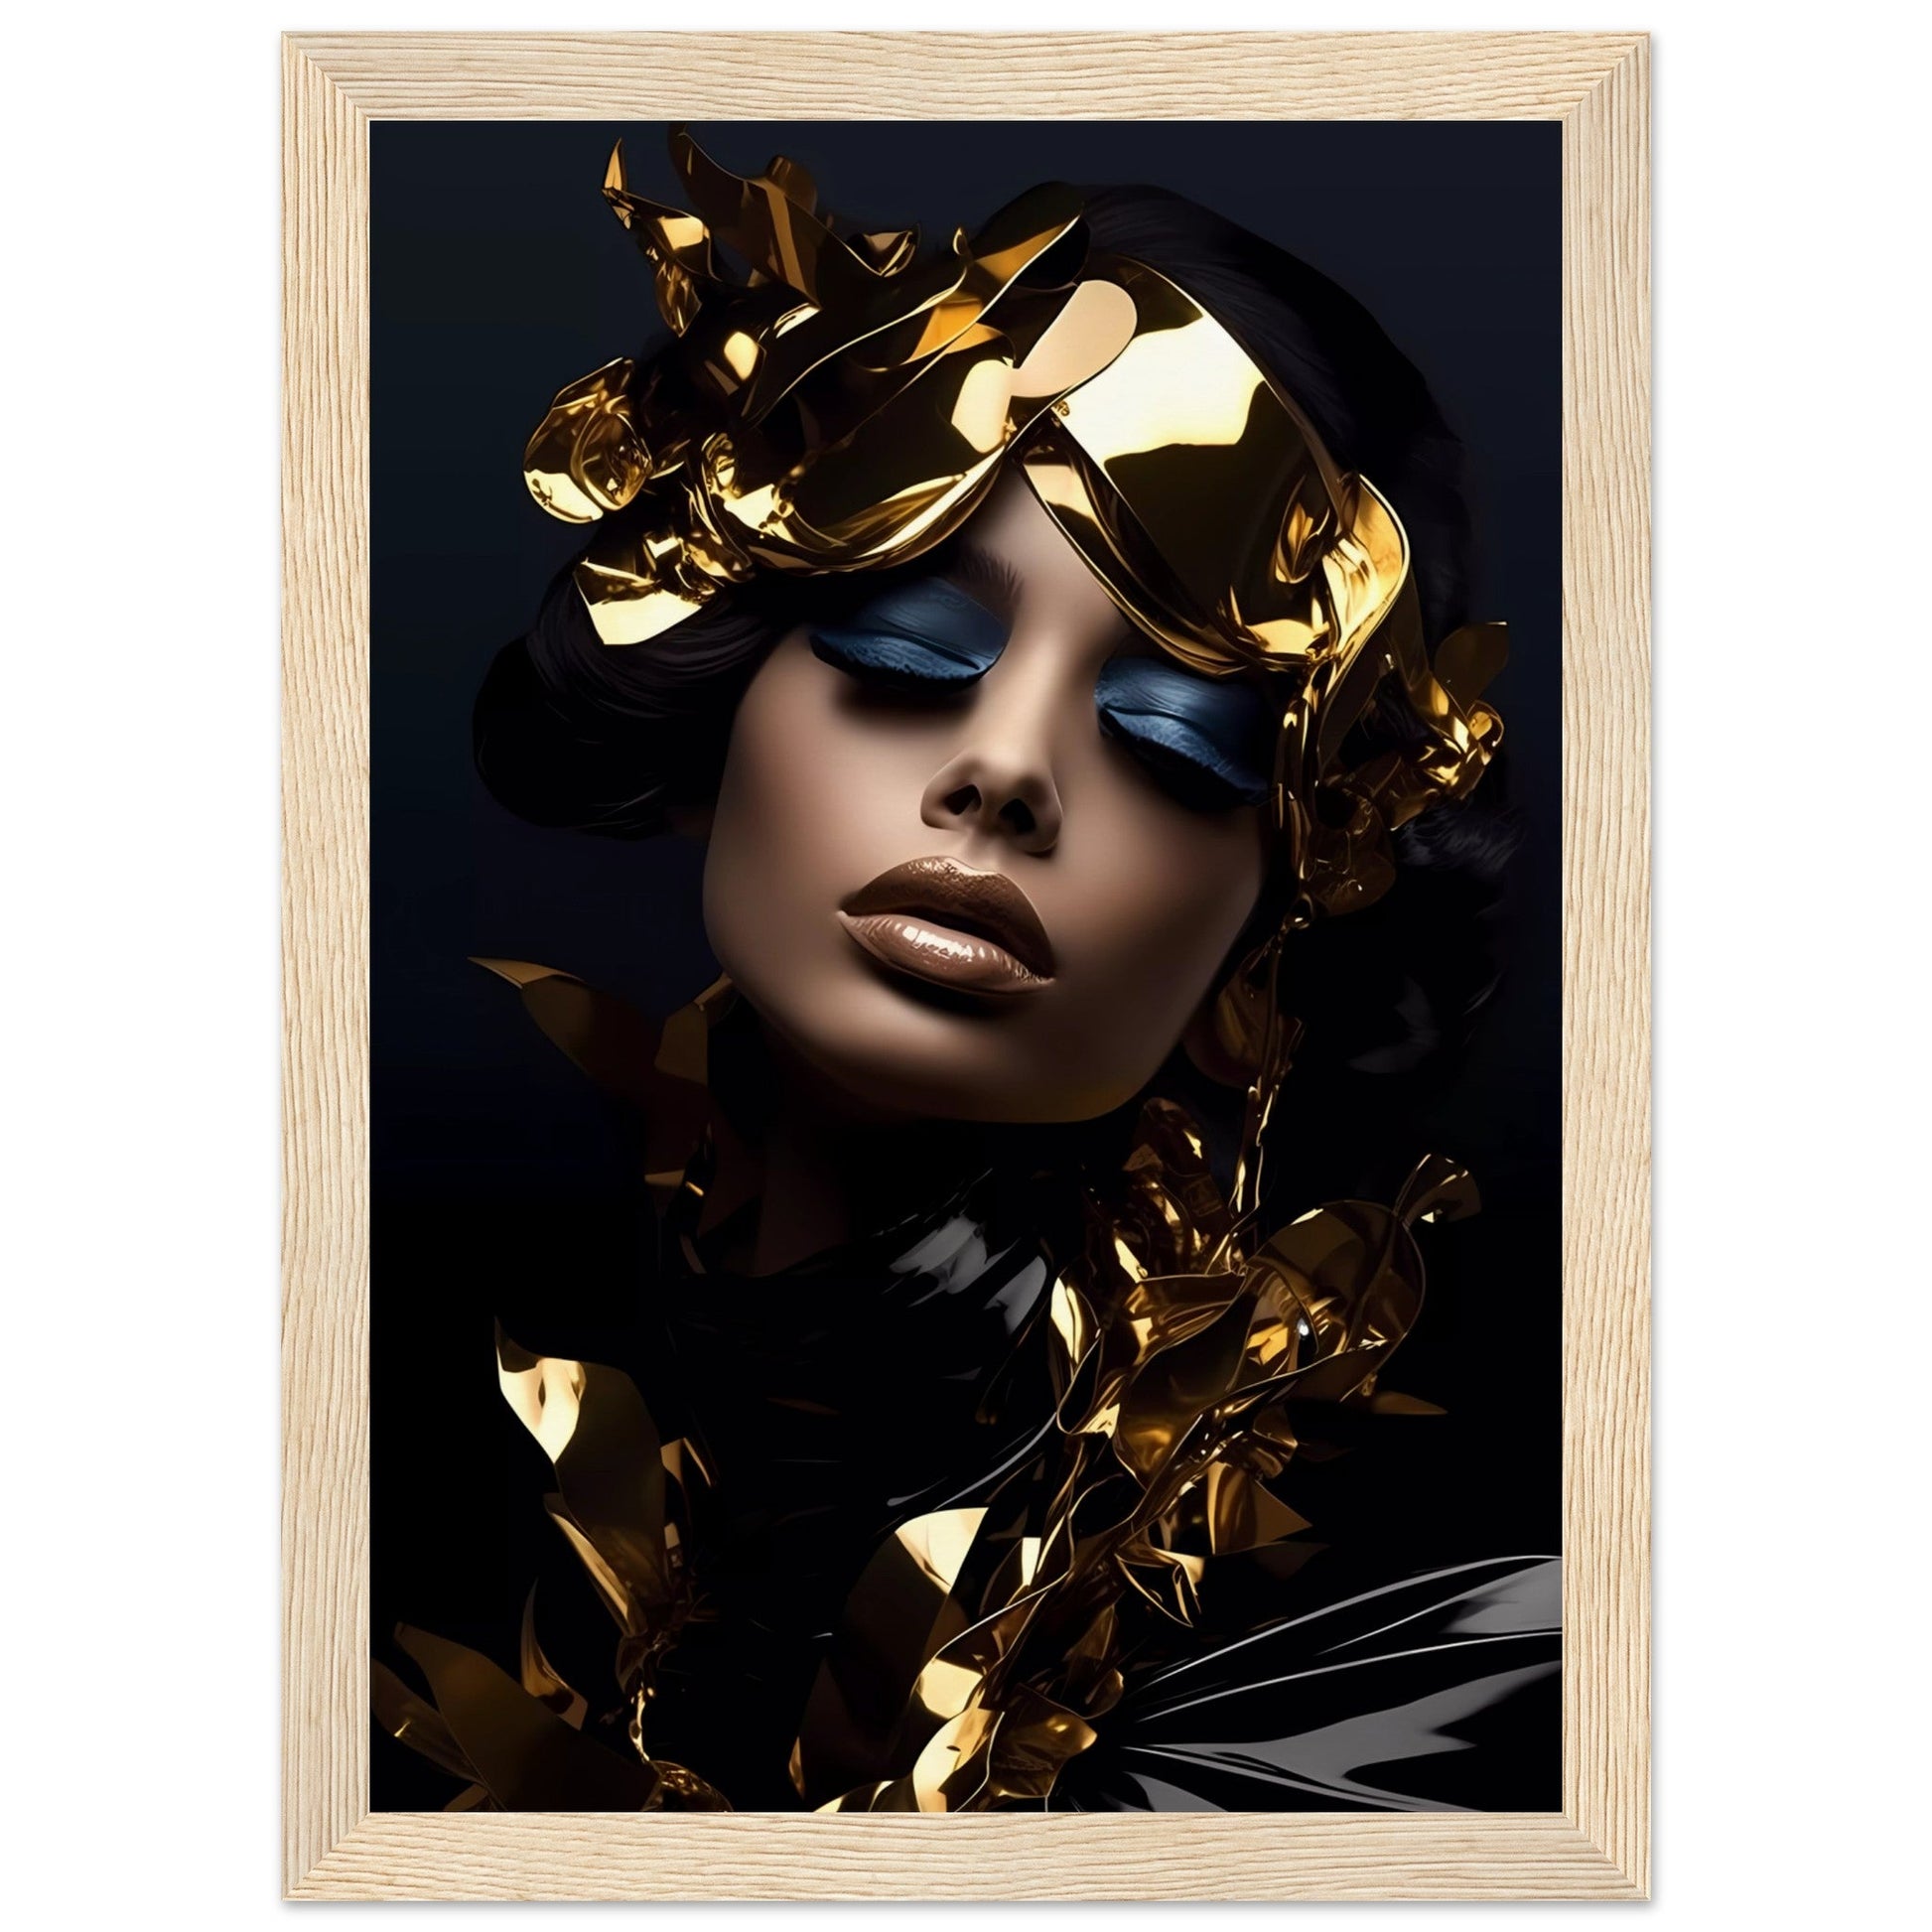 A high quality poster of a woman with gold and black makeup, It Is Gold The Oracle Windows™ Collection, a fashion wall art.